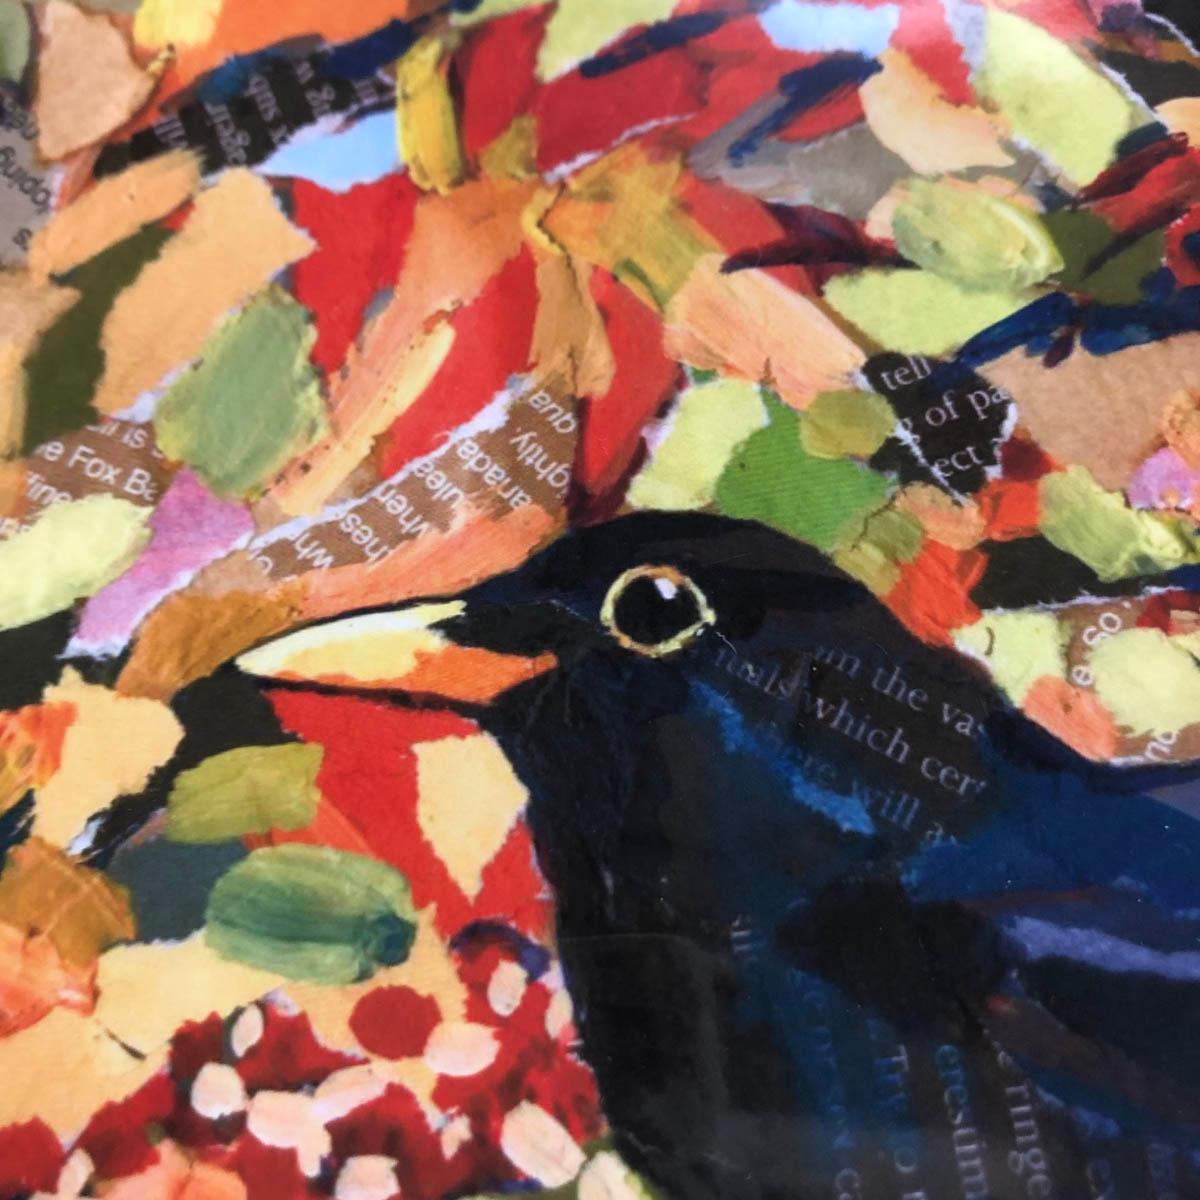 Paul Bartlett is a highly acclaimed artist who has won many awards for his original depictions of nature which inform and educate the viewer on conservation issues.

Autumn Blackbird is a limited edition print in a run of 100 prints.
This print is